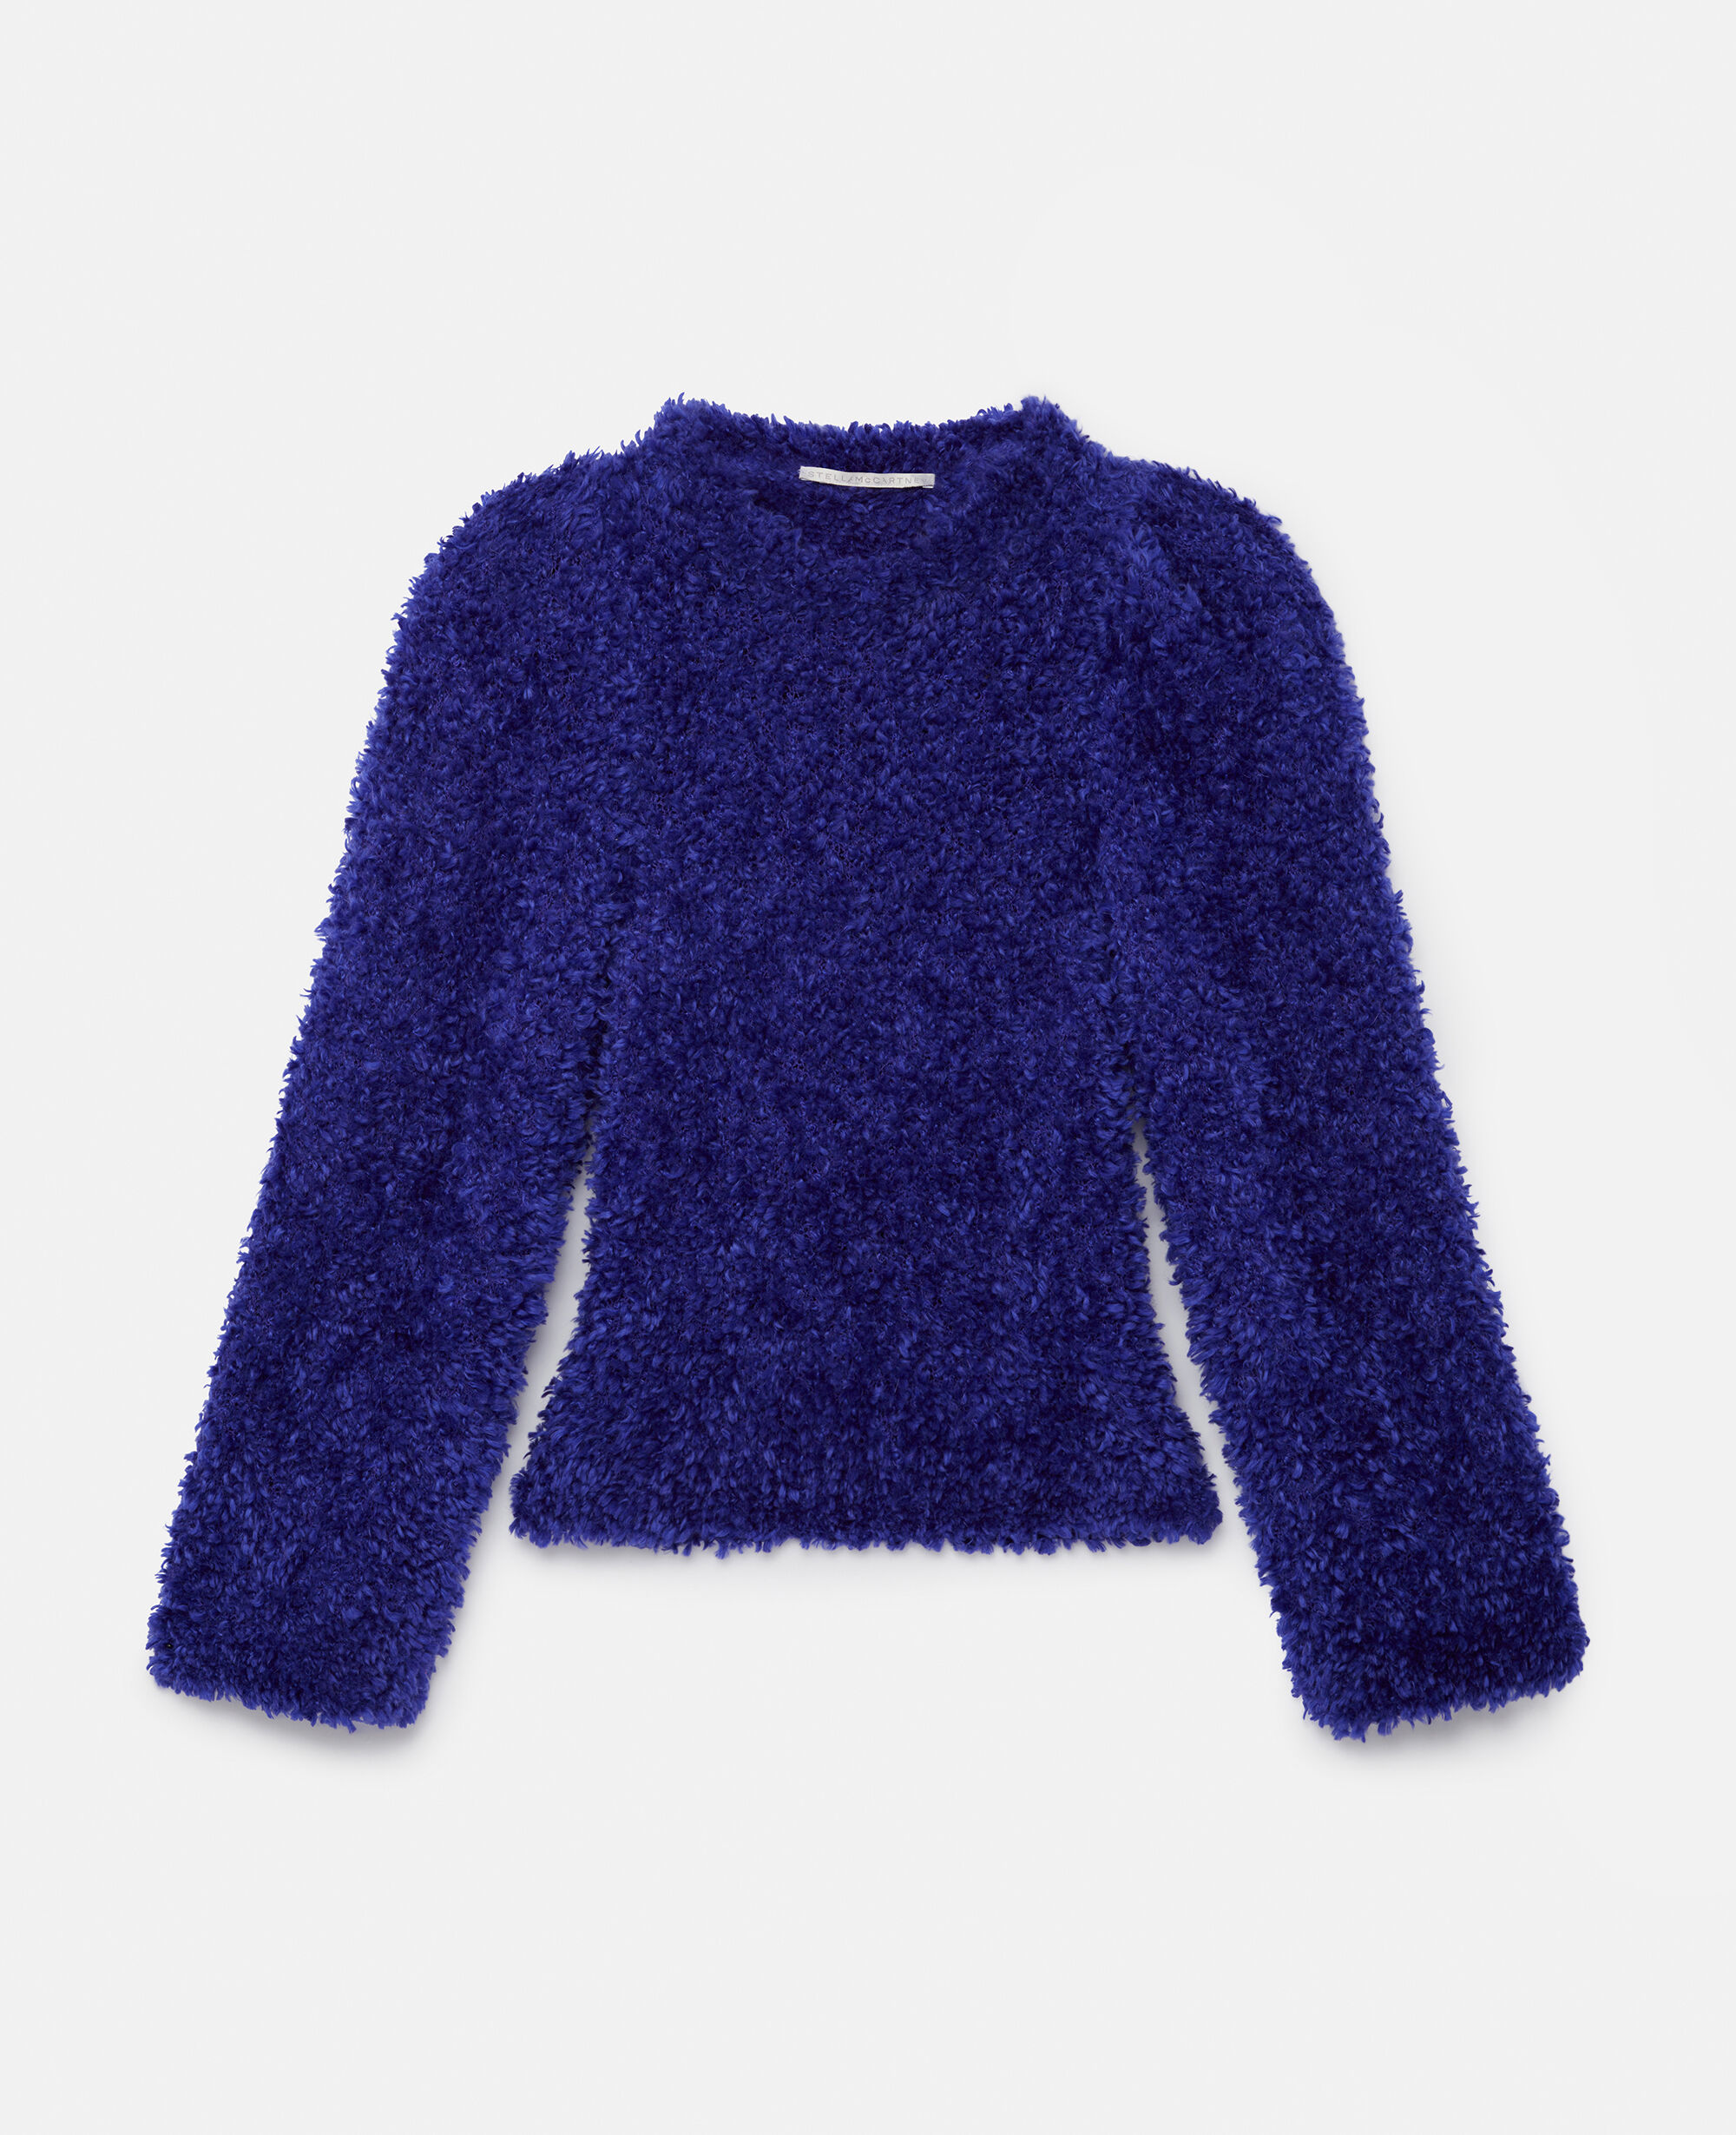 Stella McCartney Ribbed Cotton Sweater Save 11% Womens Jumpers and knitwear Stella McCartney Jumpers and knitwear 